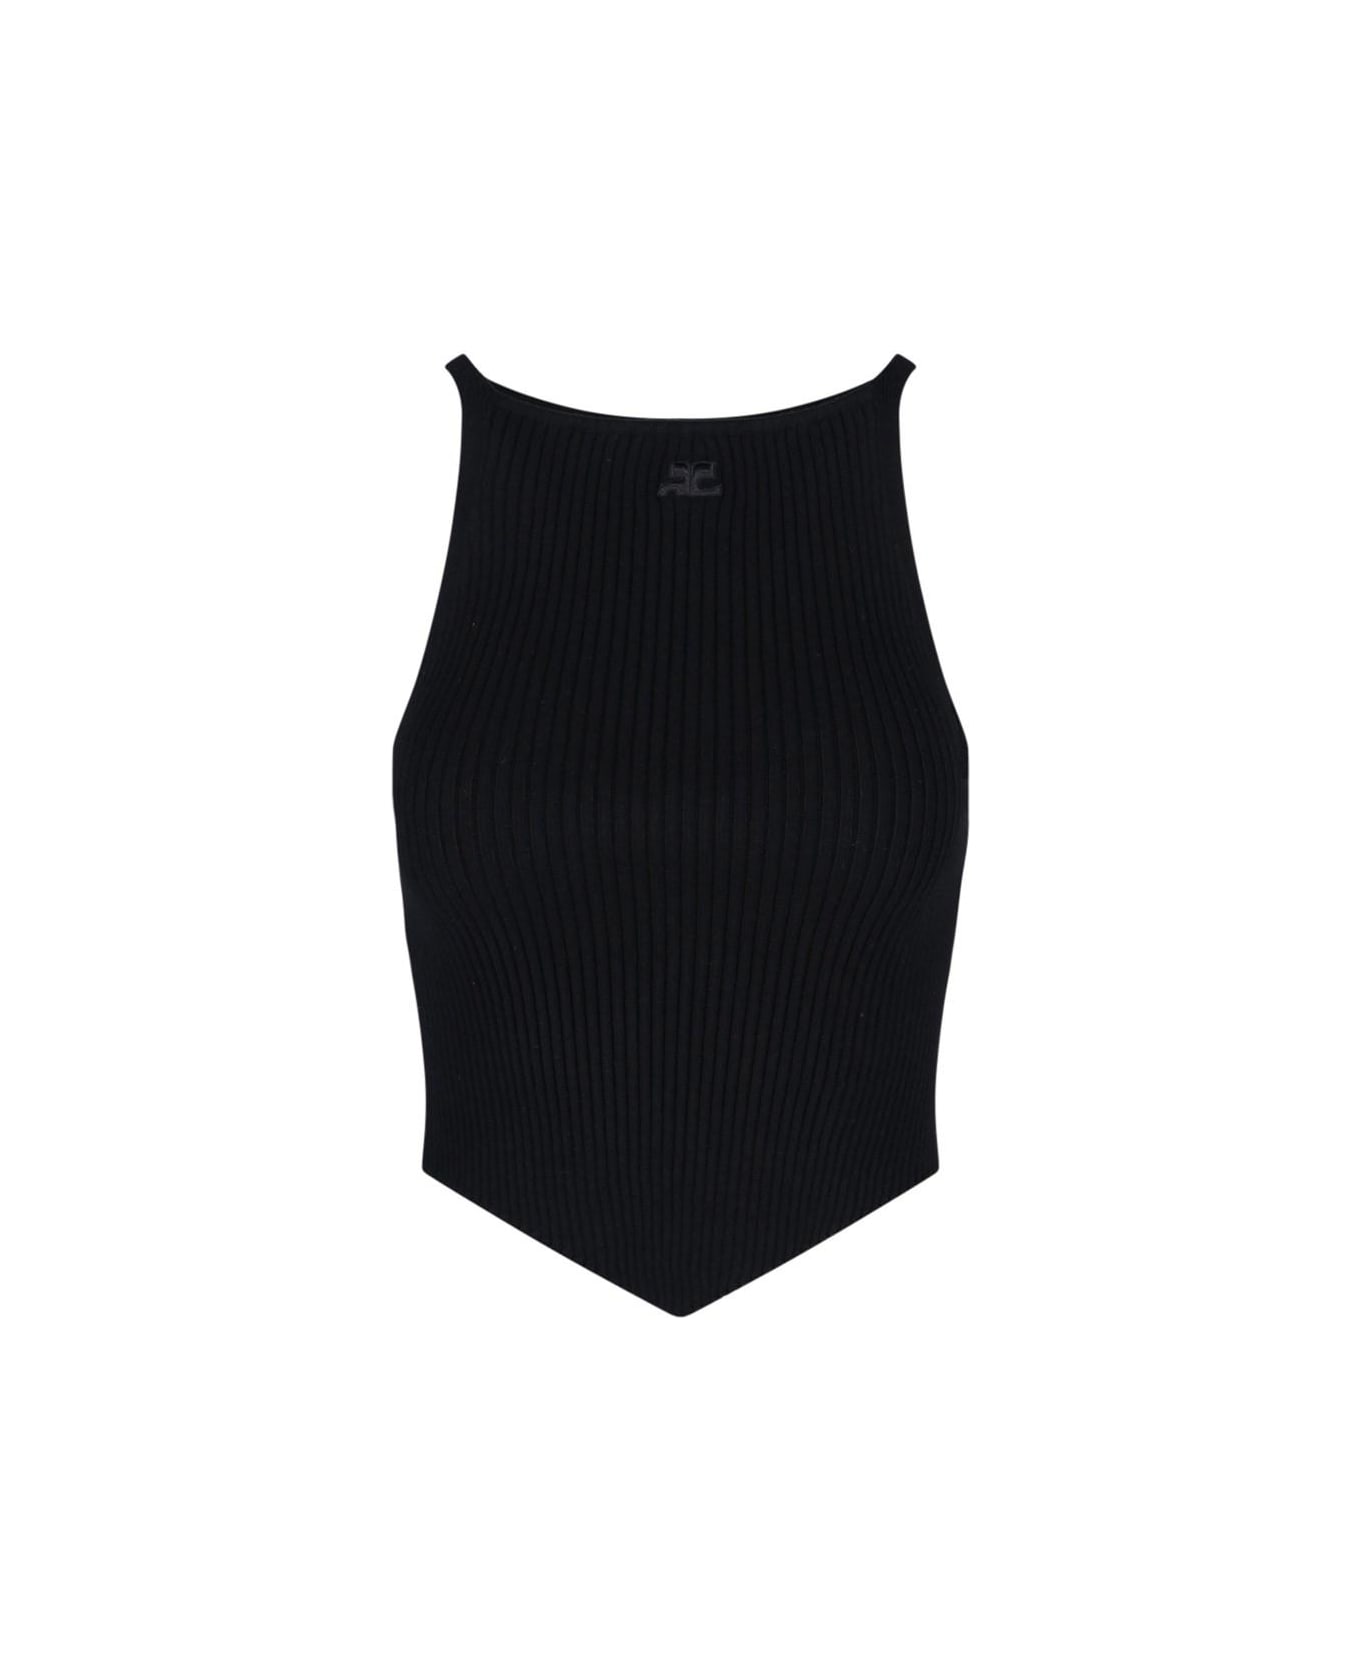 Courrèges 'pointy' Tank Top - Black